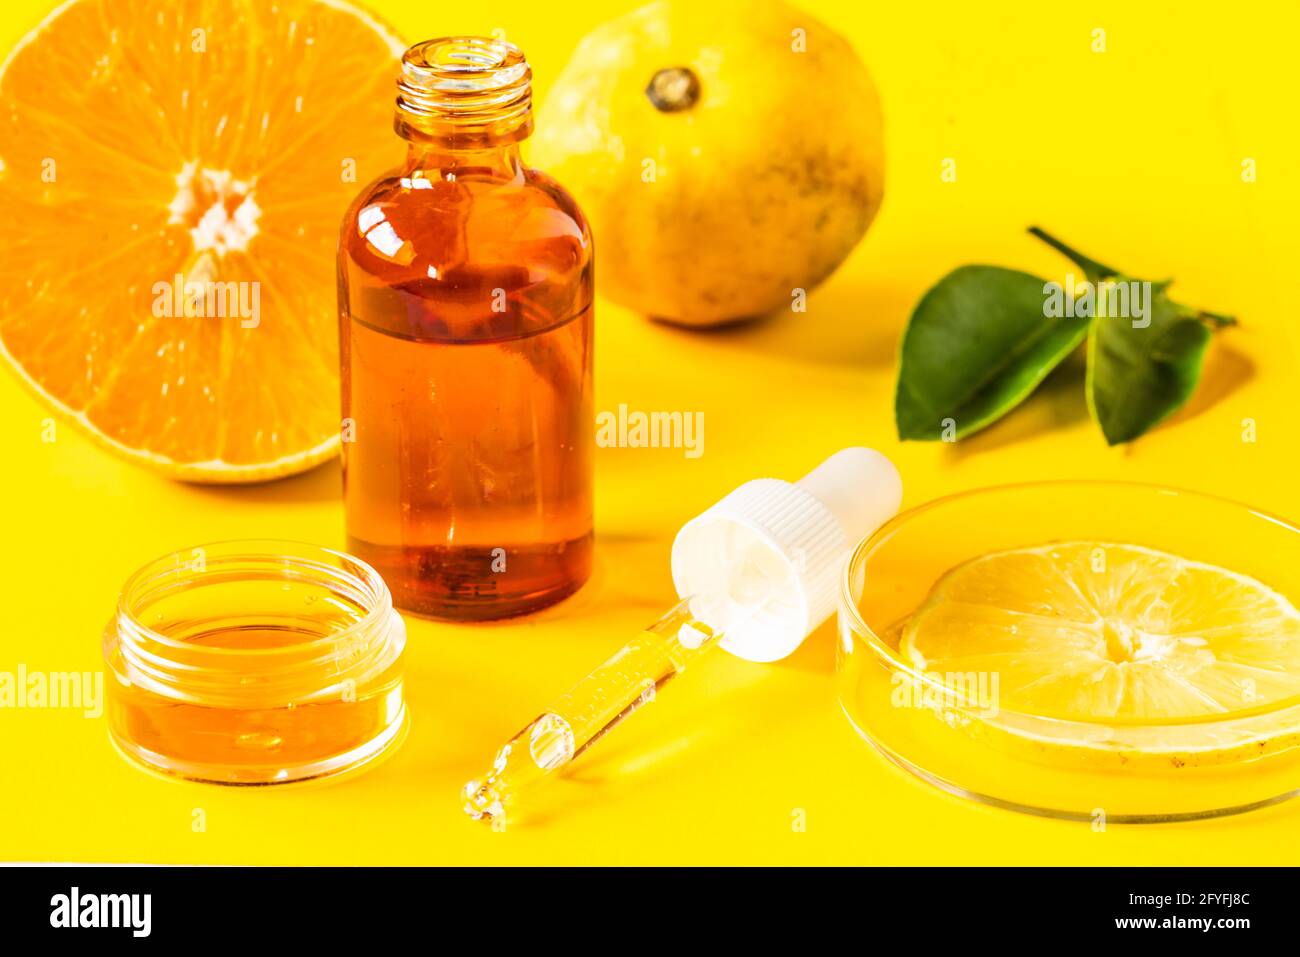 Illustration on the use of vitamin C in the manufacture of cosmetics. Stock Photo